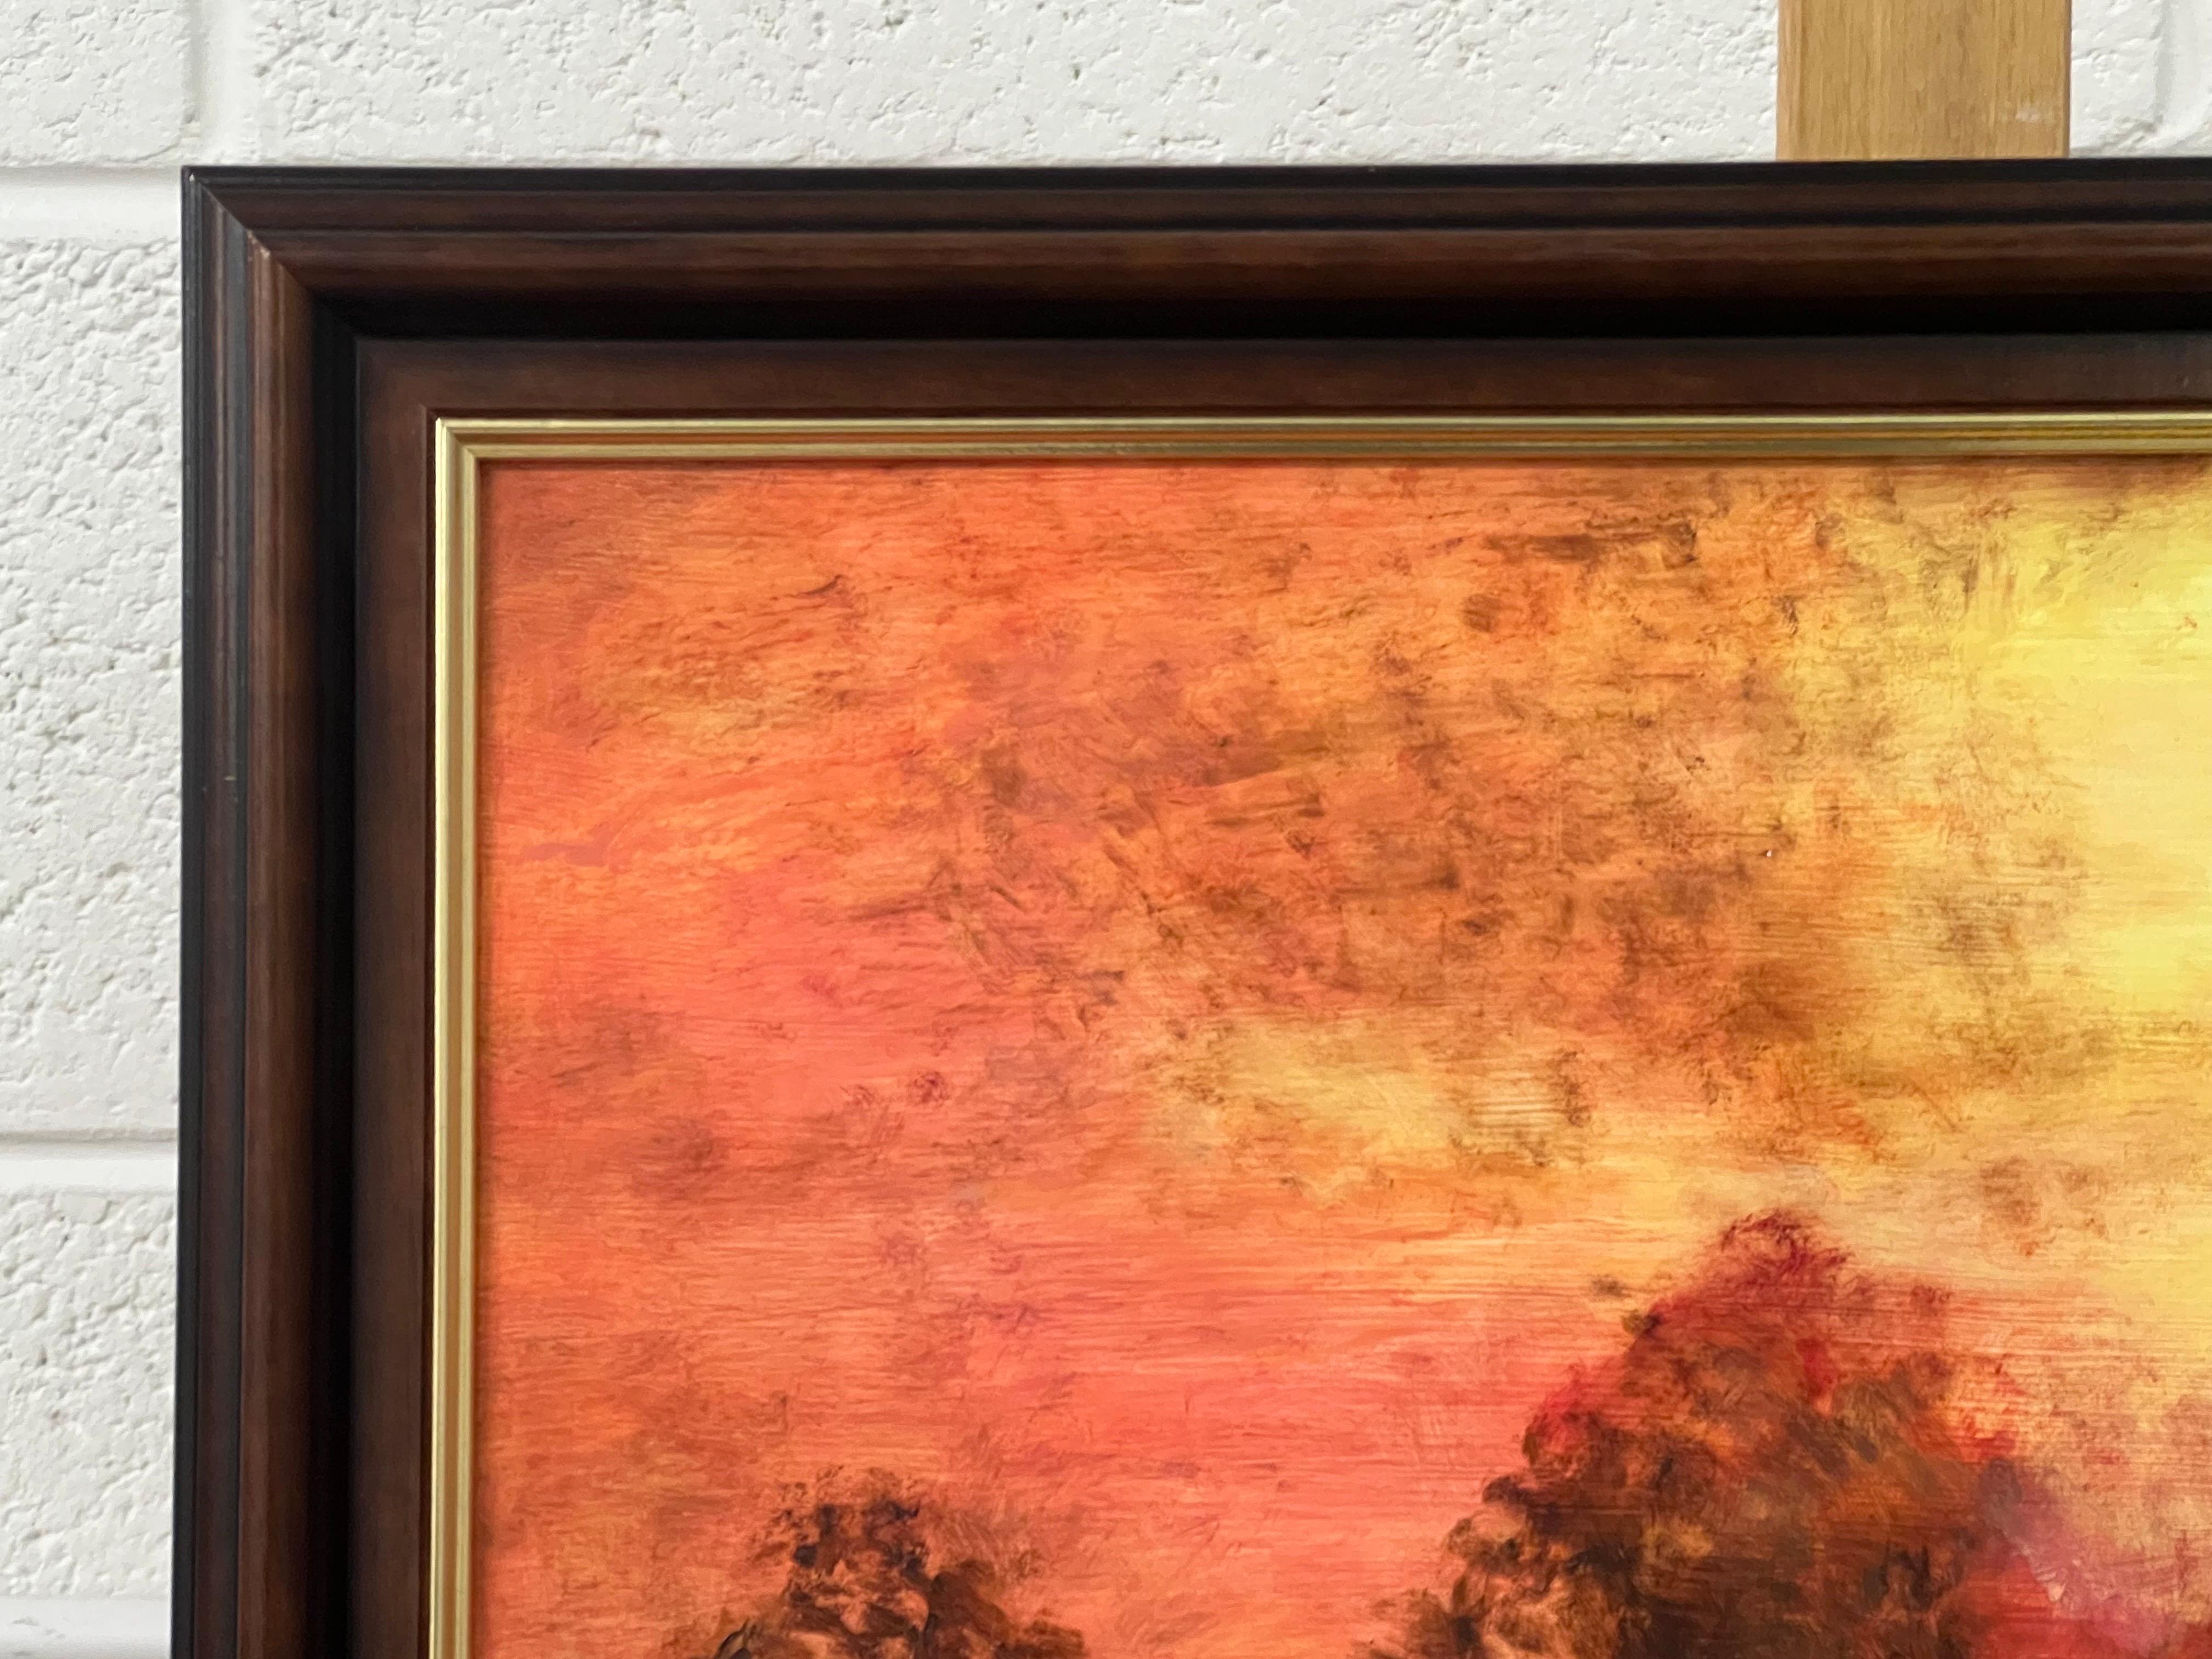 Tree Landscape Sunset with Oranges & Yellows by British Artist For Sale 4